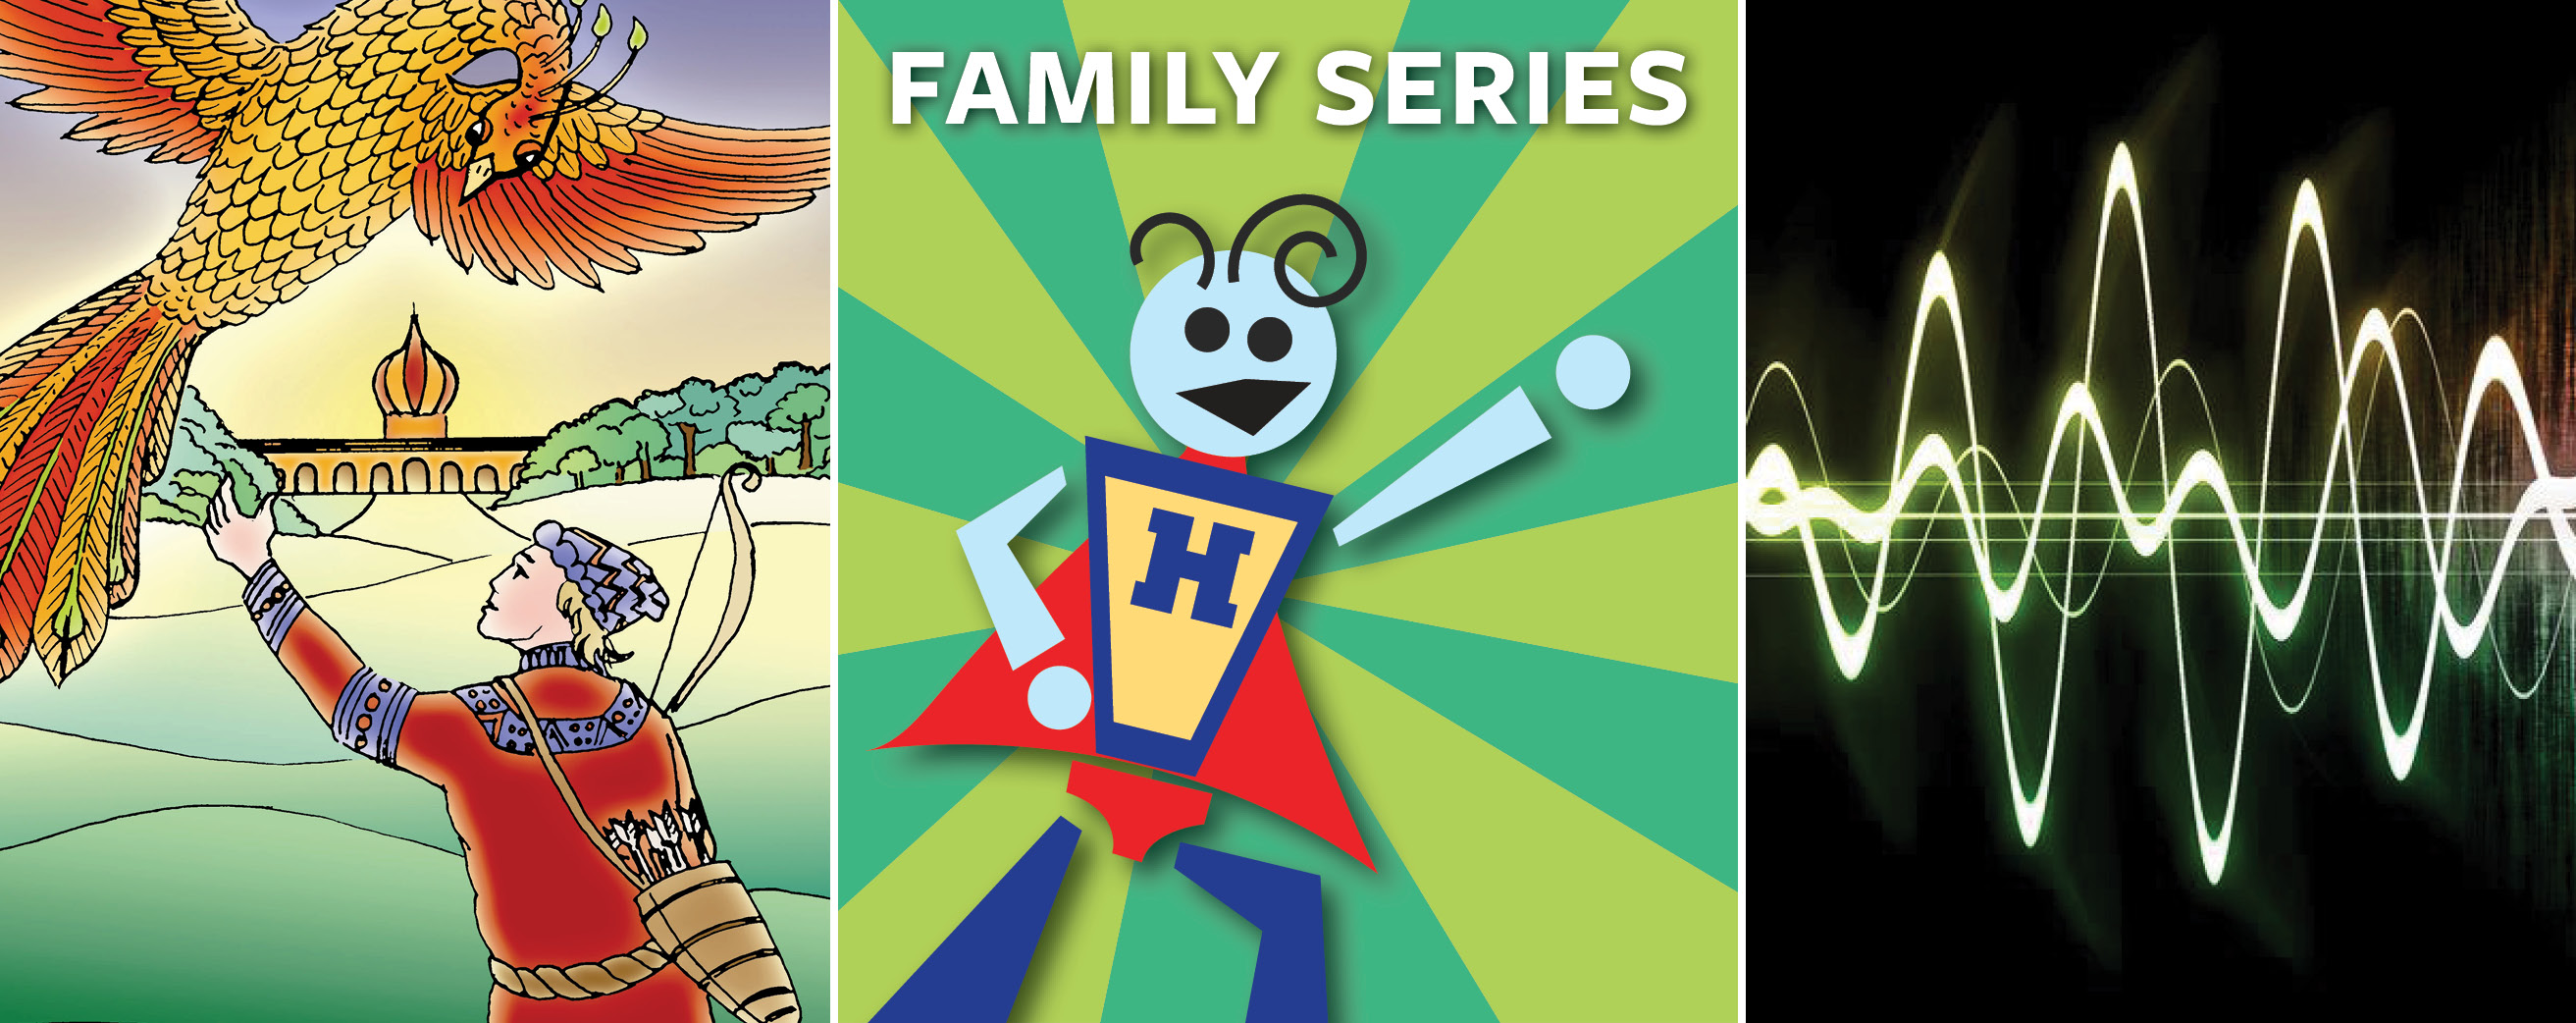 family show series promotional banner